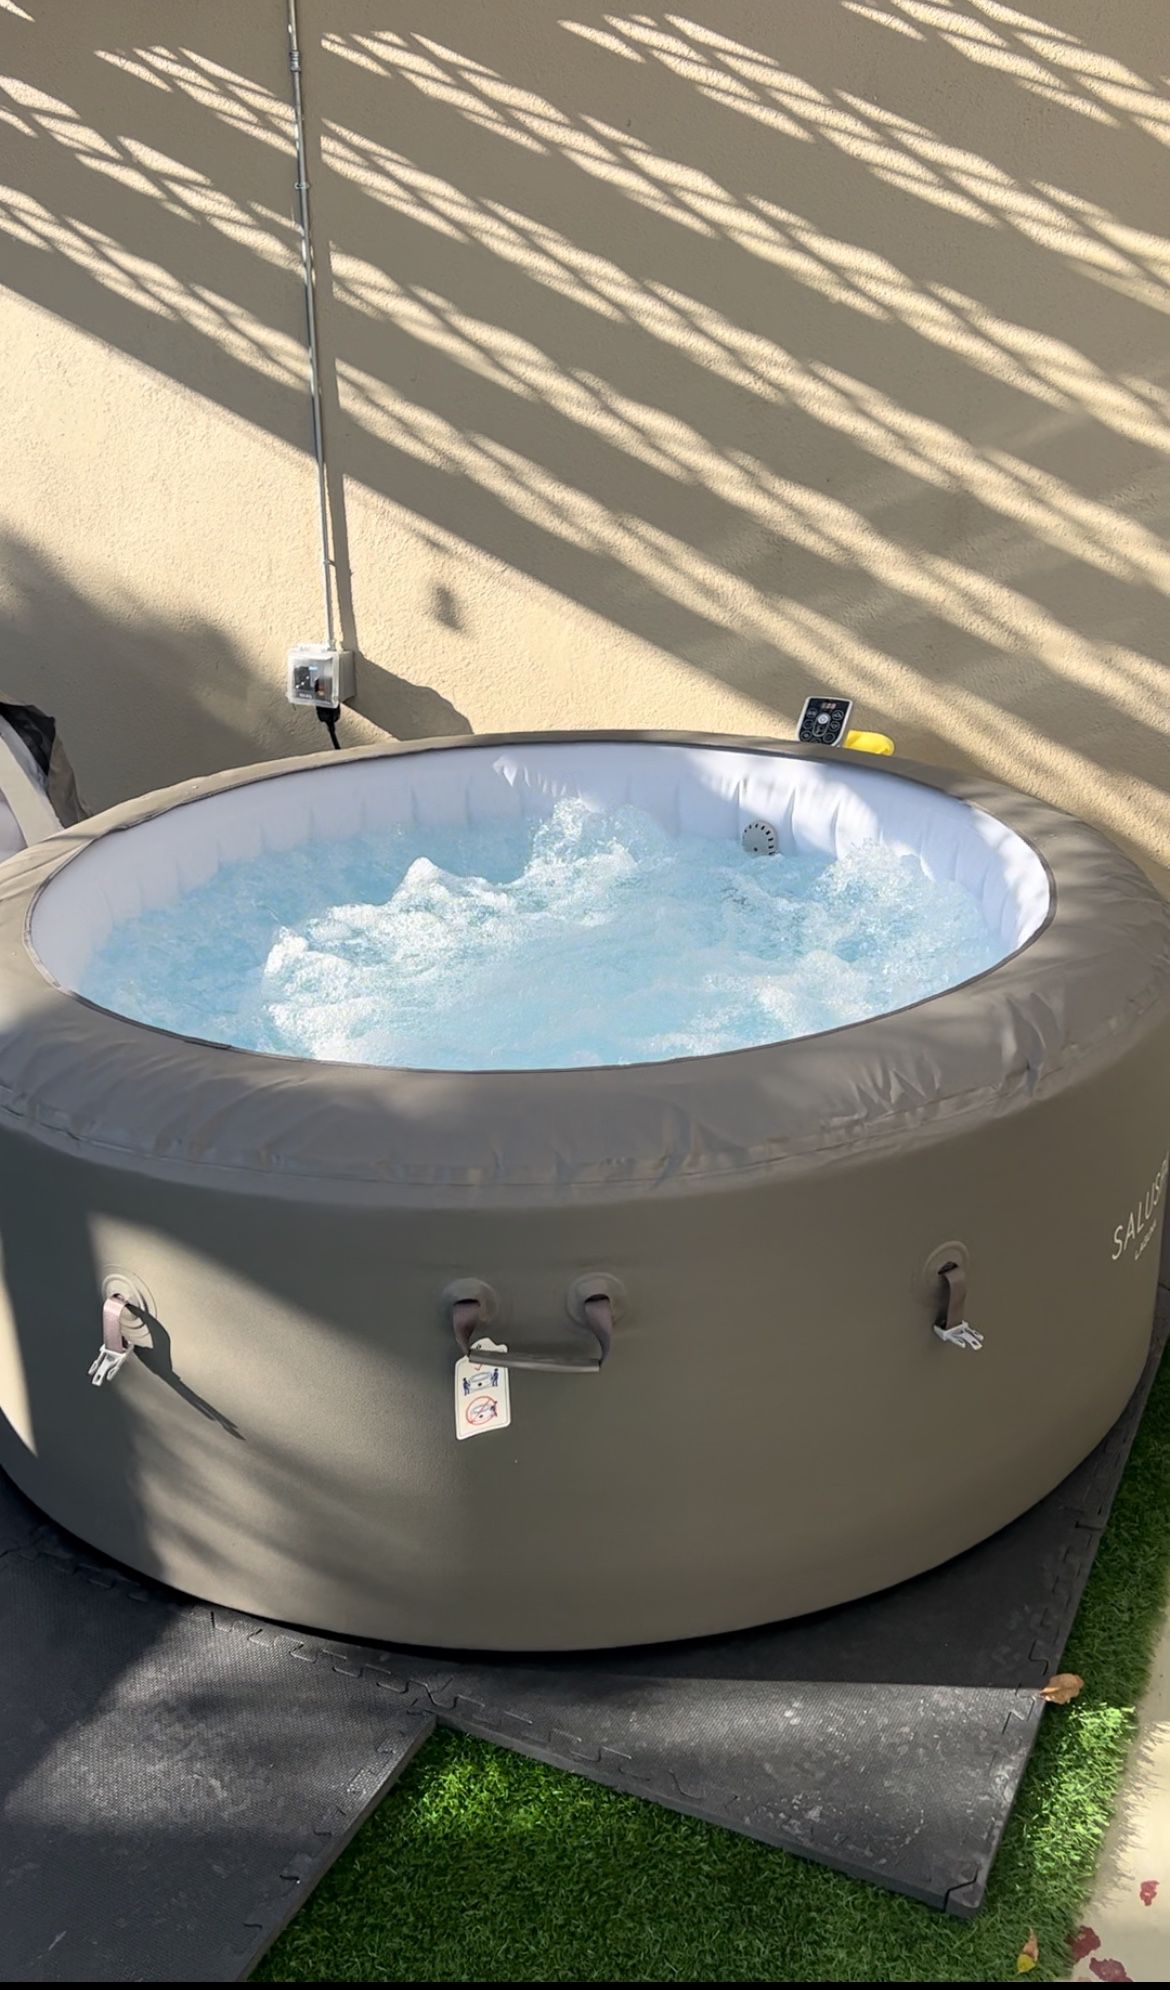 Used inflatable hot tube for sale.